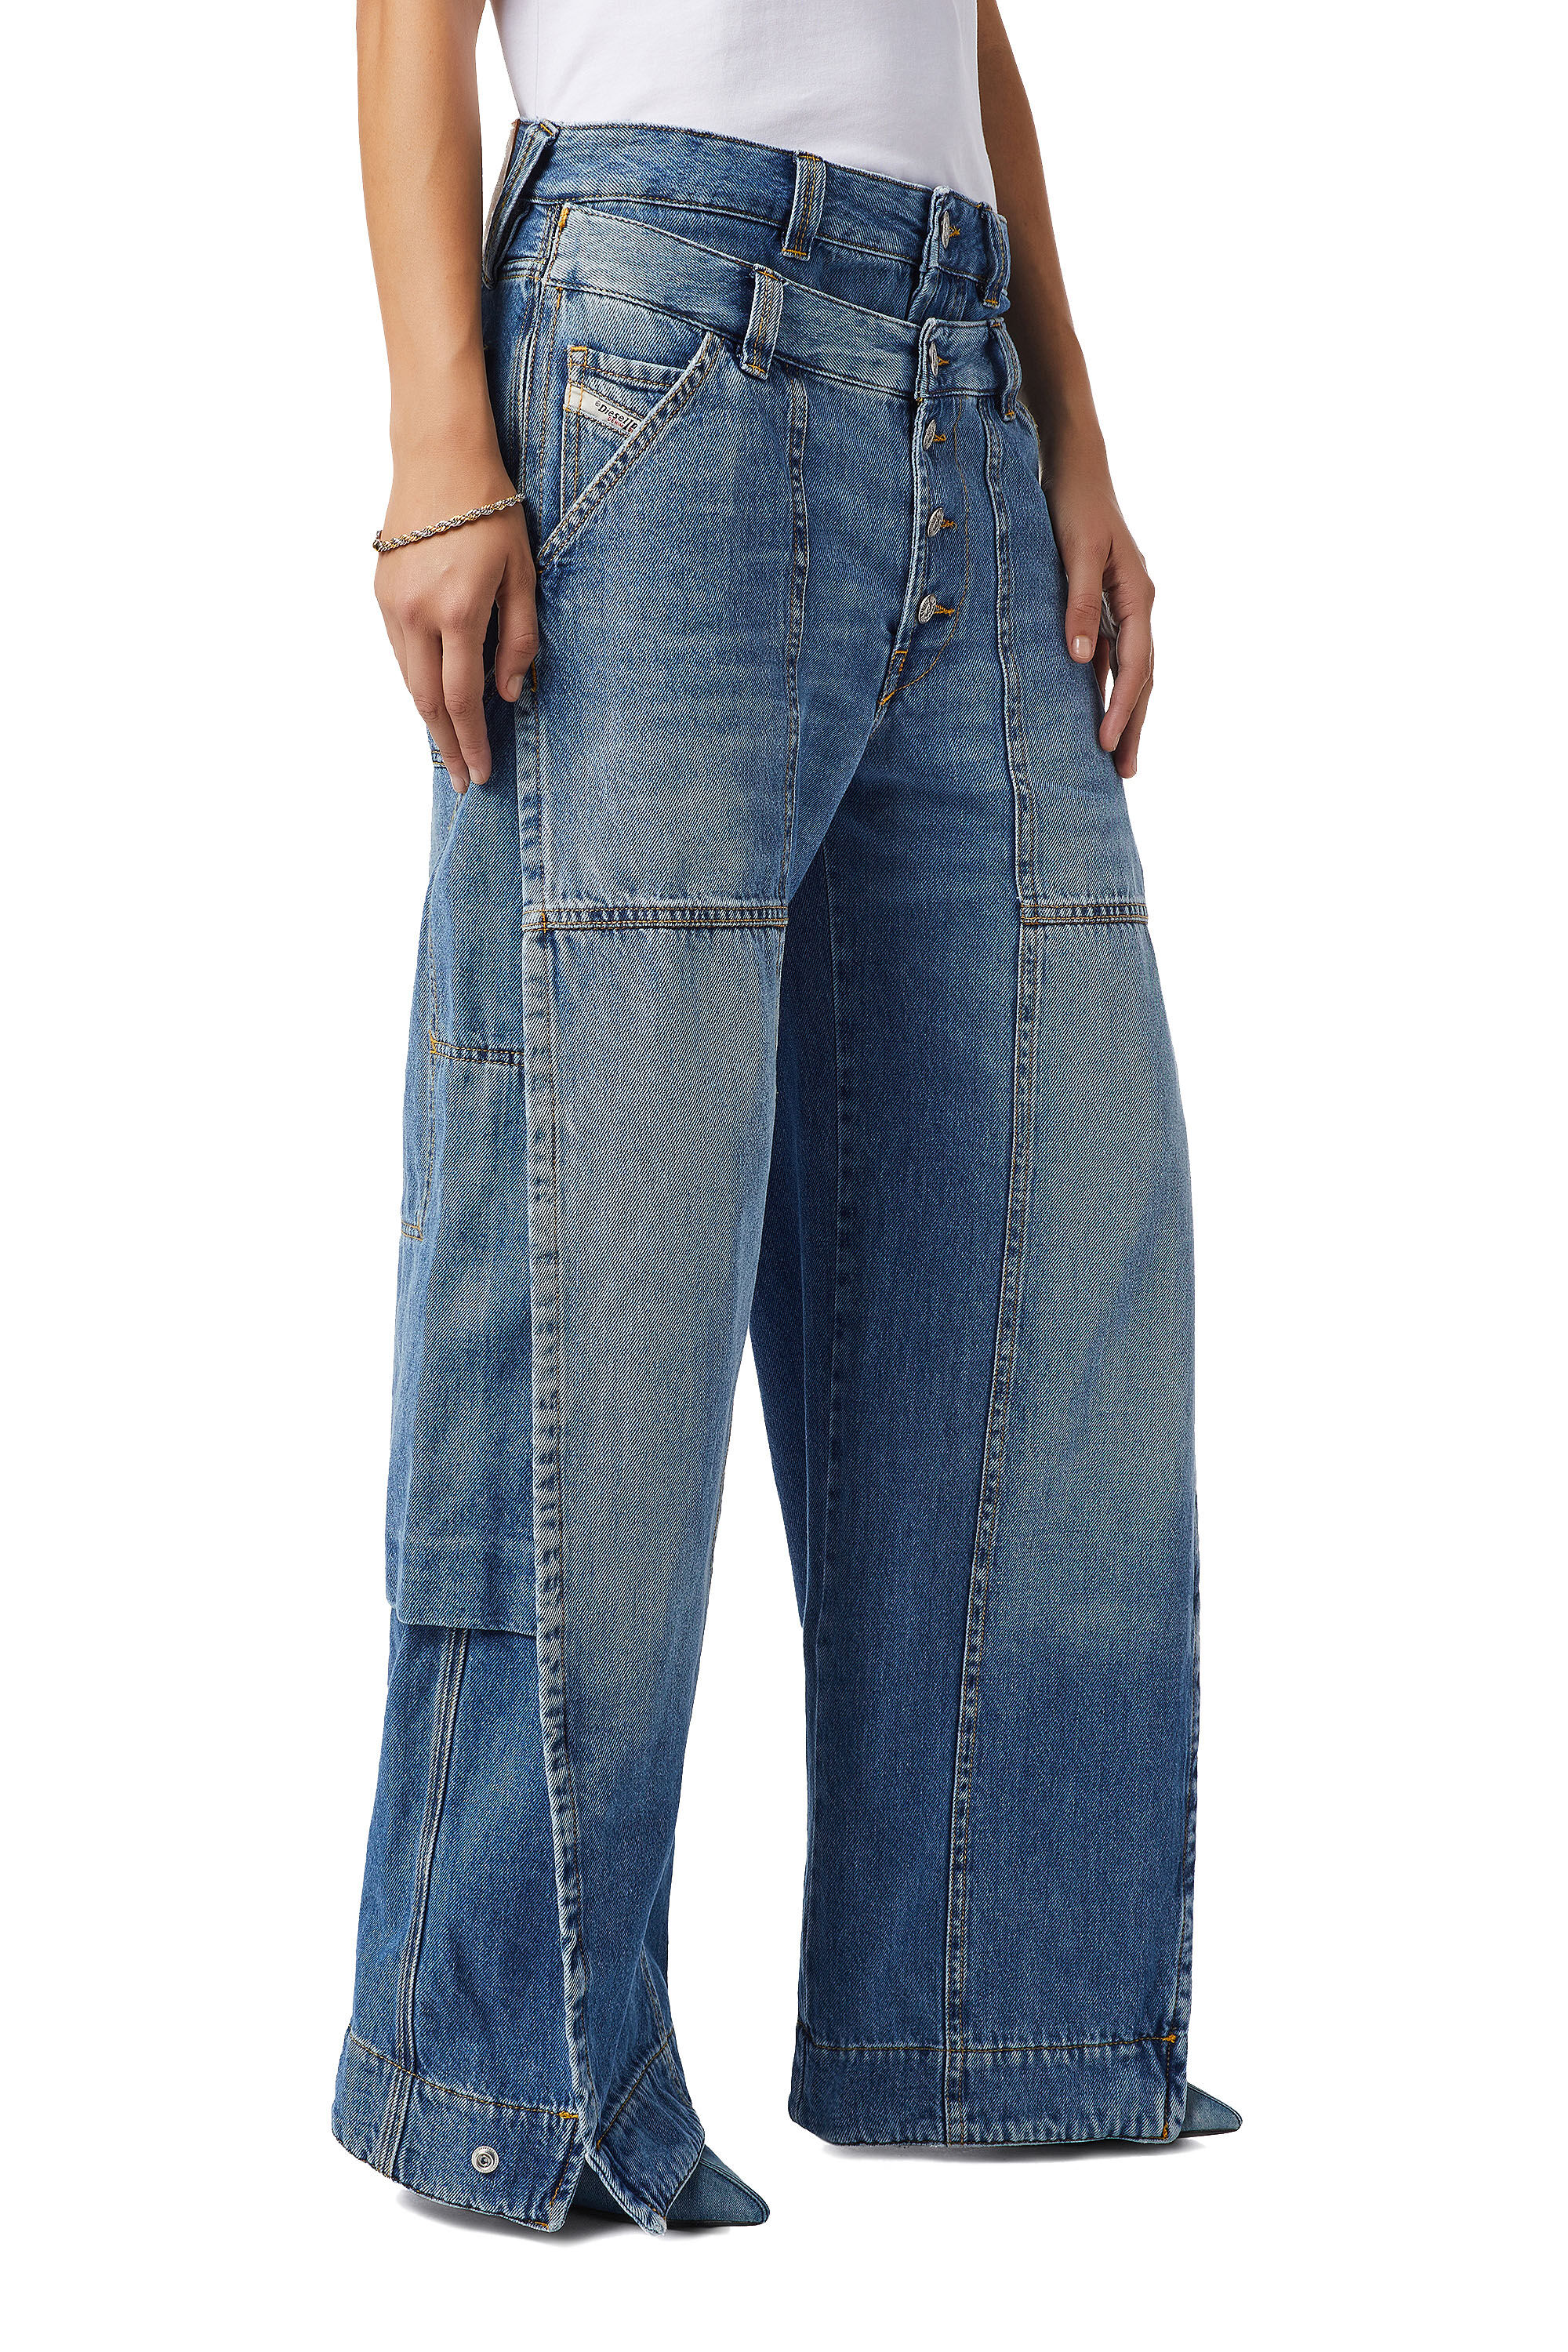 Miscellaneous goods Accordingly All the time D-LALY-SP1: Wide Medium blue Jeans | Diesel